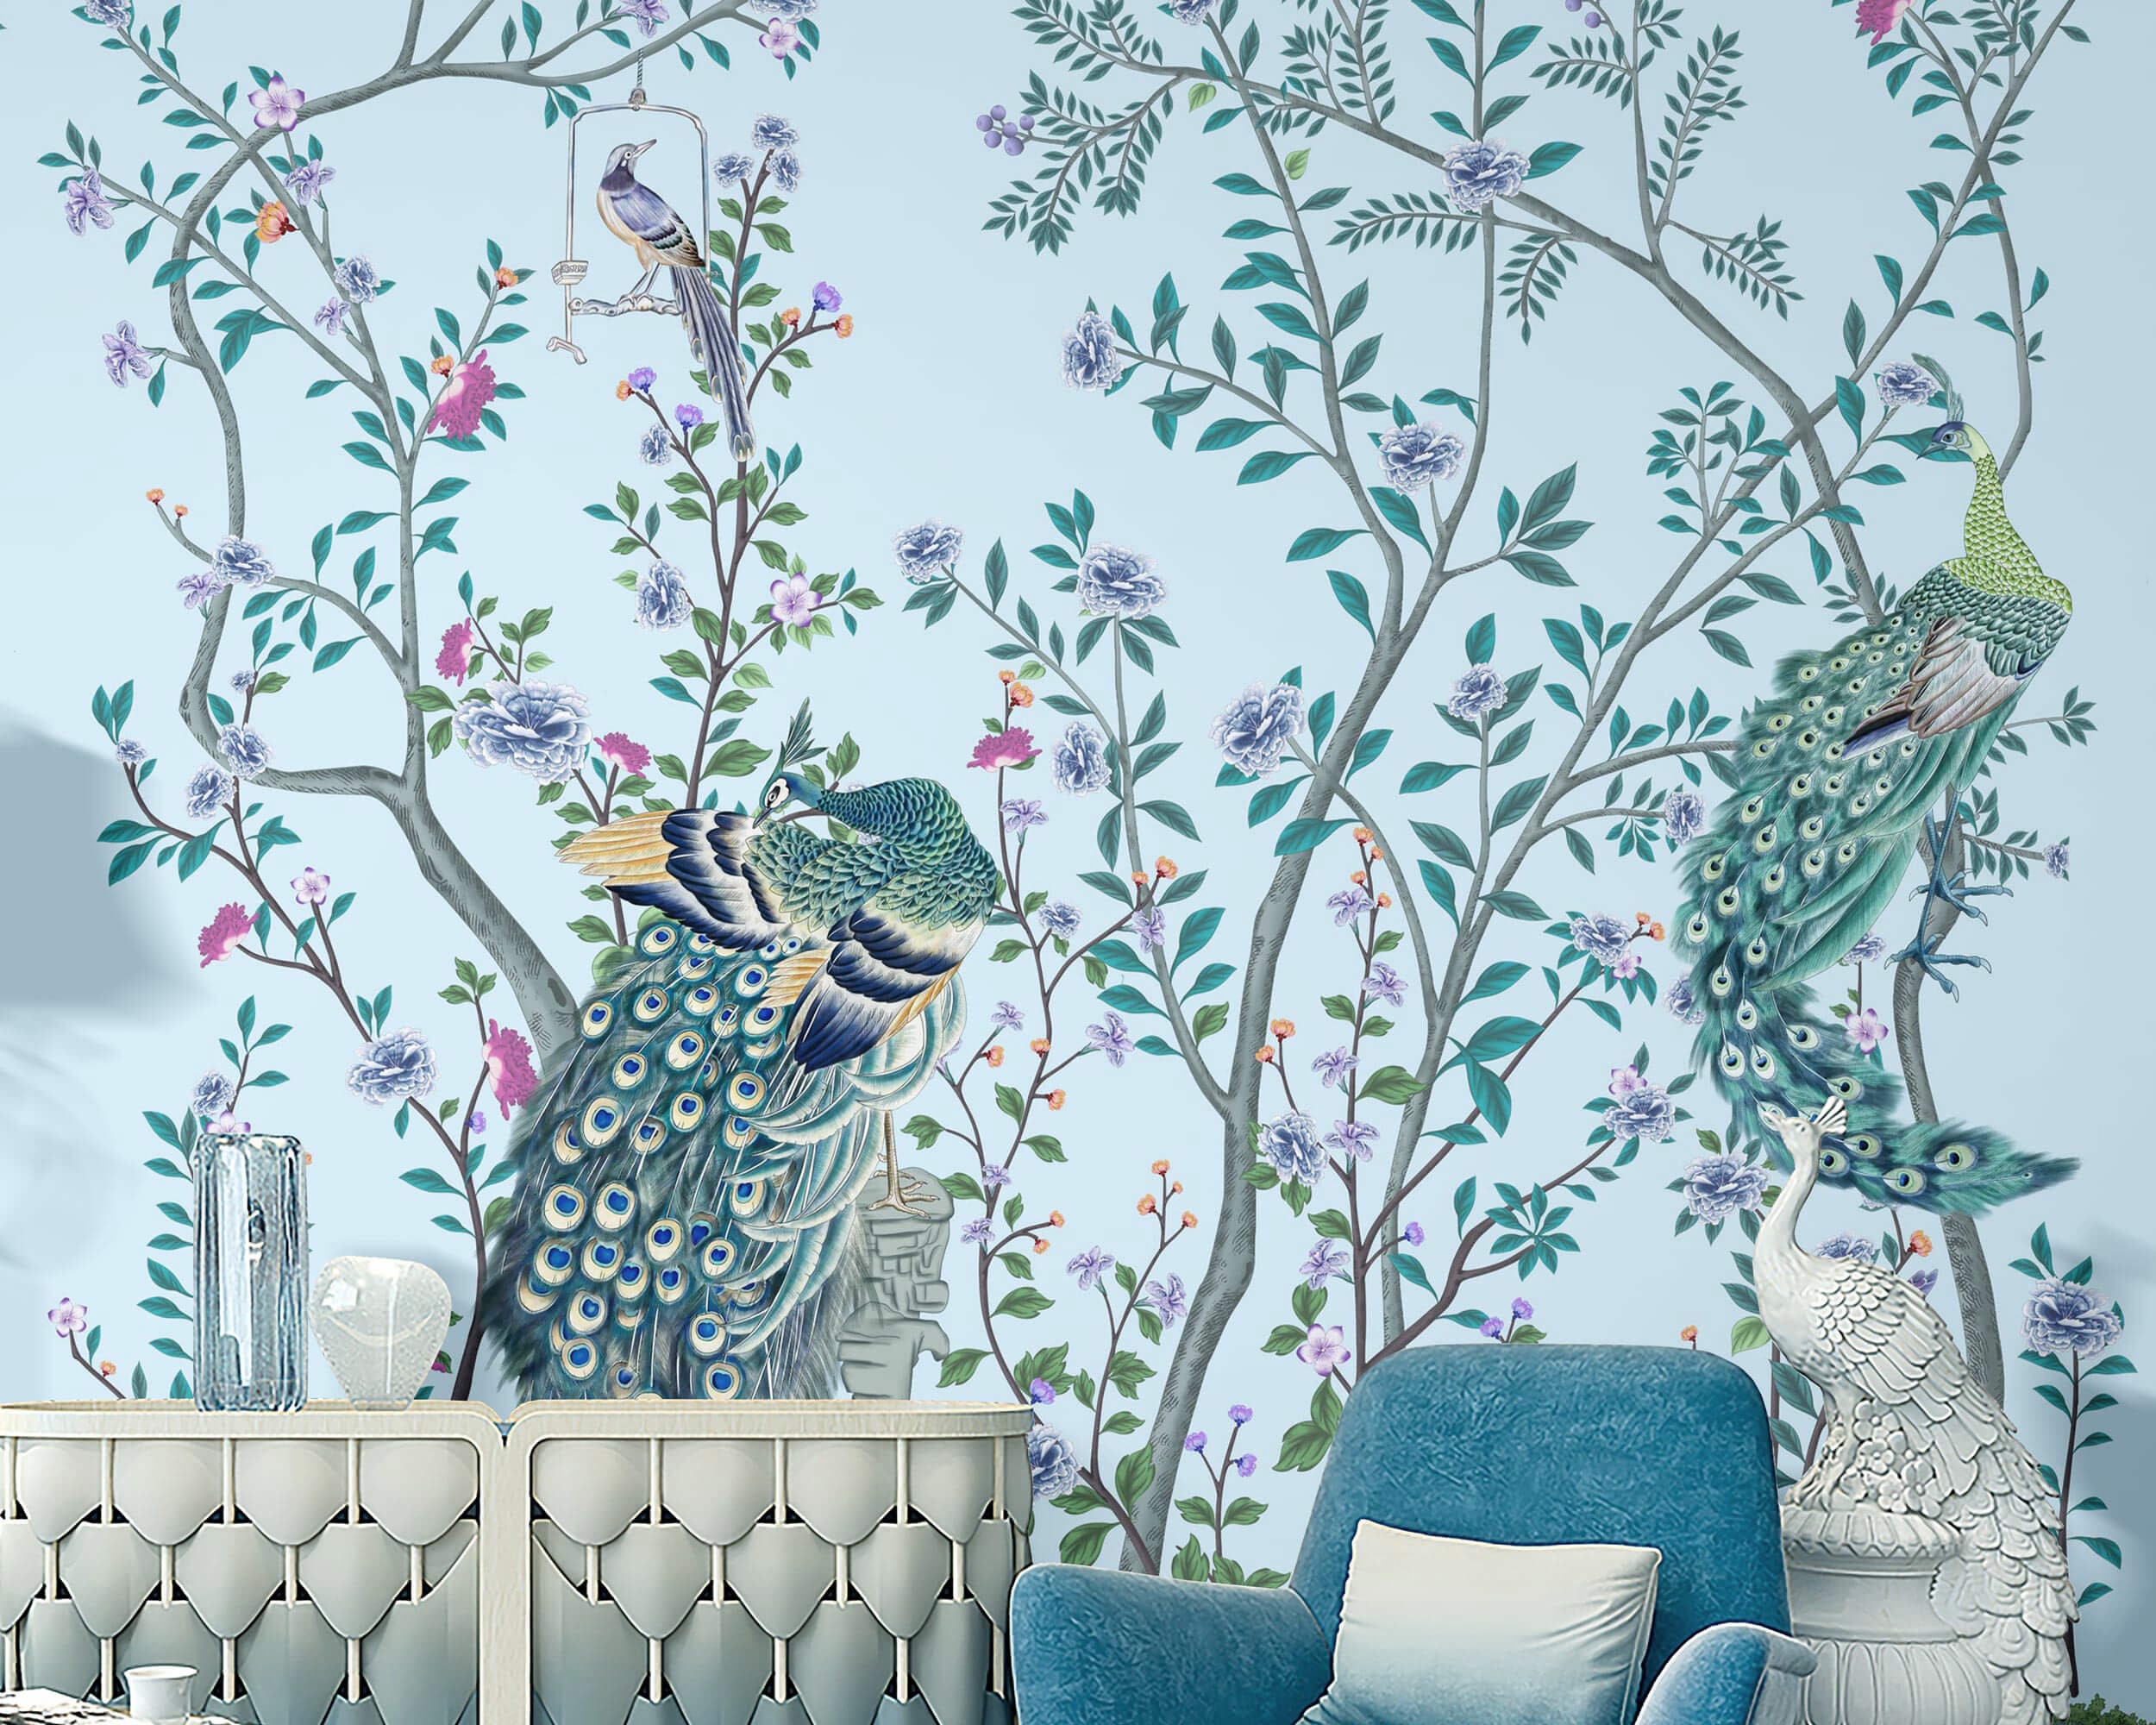 Blue Chinoiserie Wallpaper with Limestone Fireplace  Transitional  Living  Room